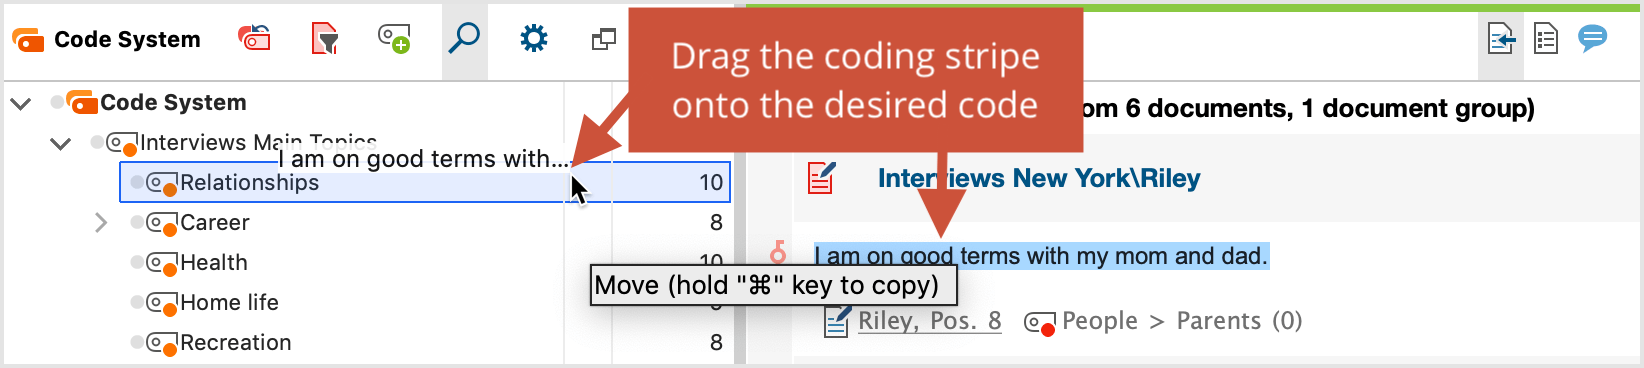 Click and drag to move the coded segment to the desired code